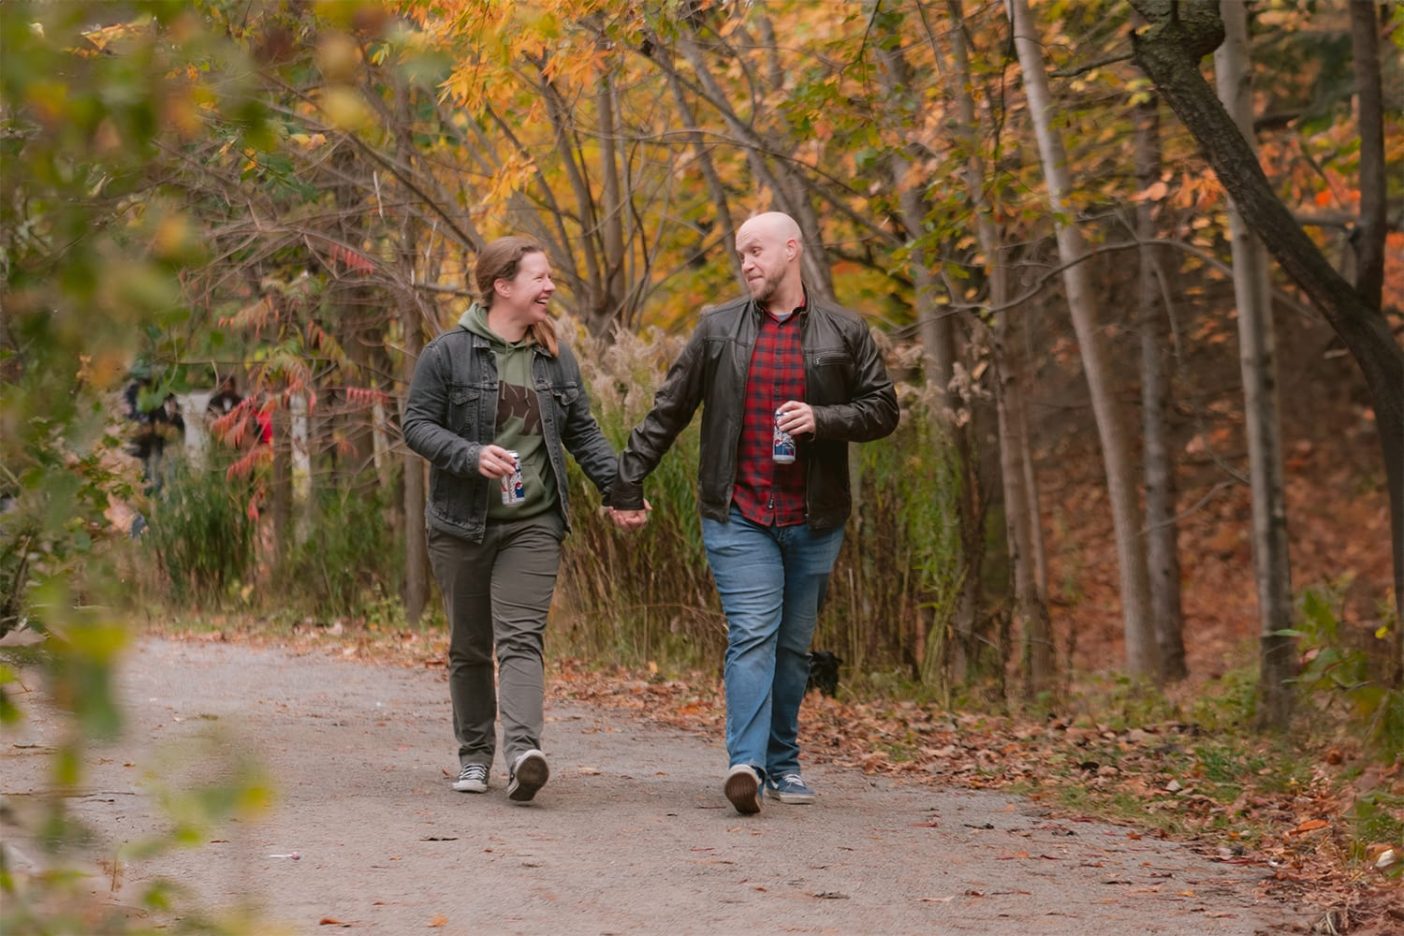 An engaged couple with beers in hand go for a walk through a forest during fall